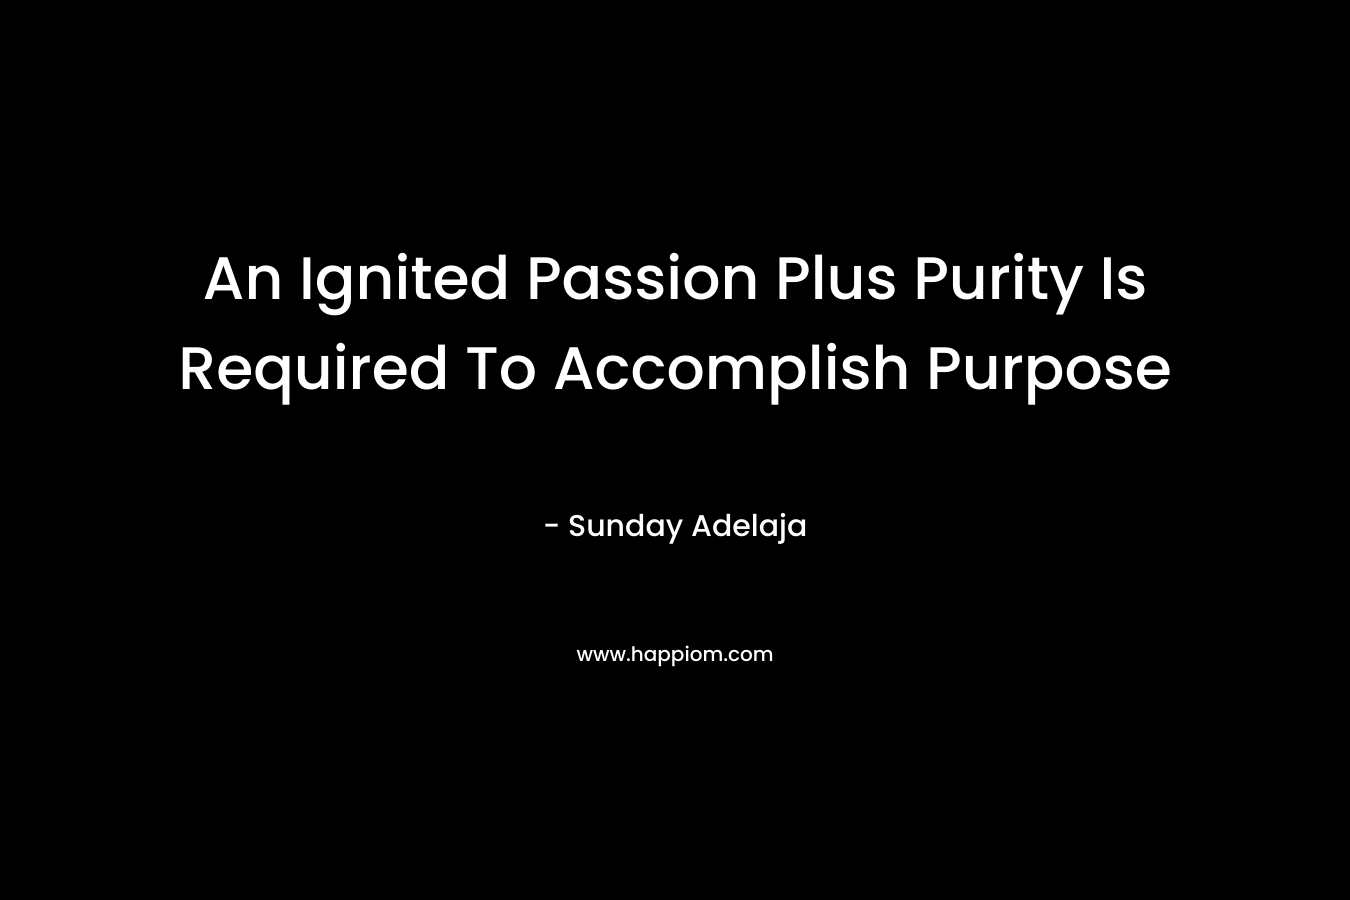 An Ignited Passion Plus Purity Is Required To Accomplish Purpose